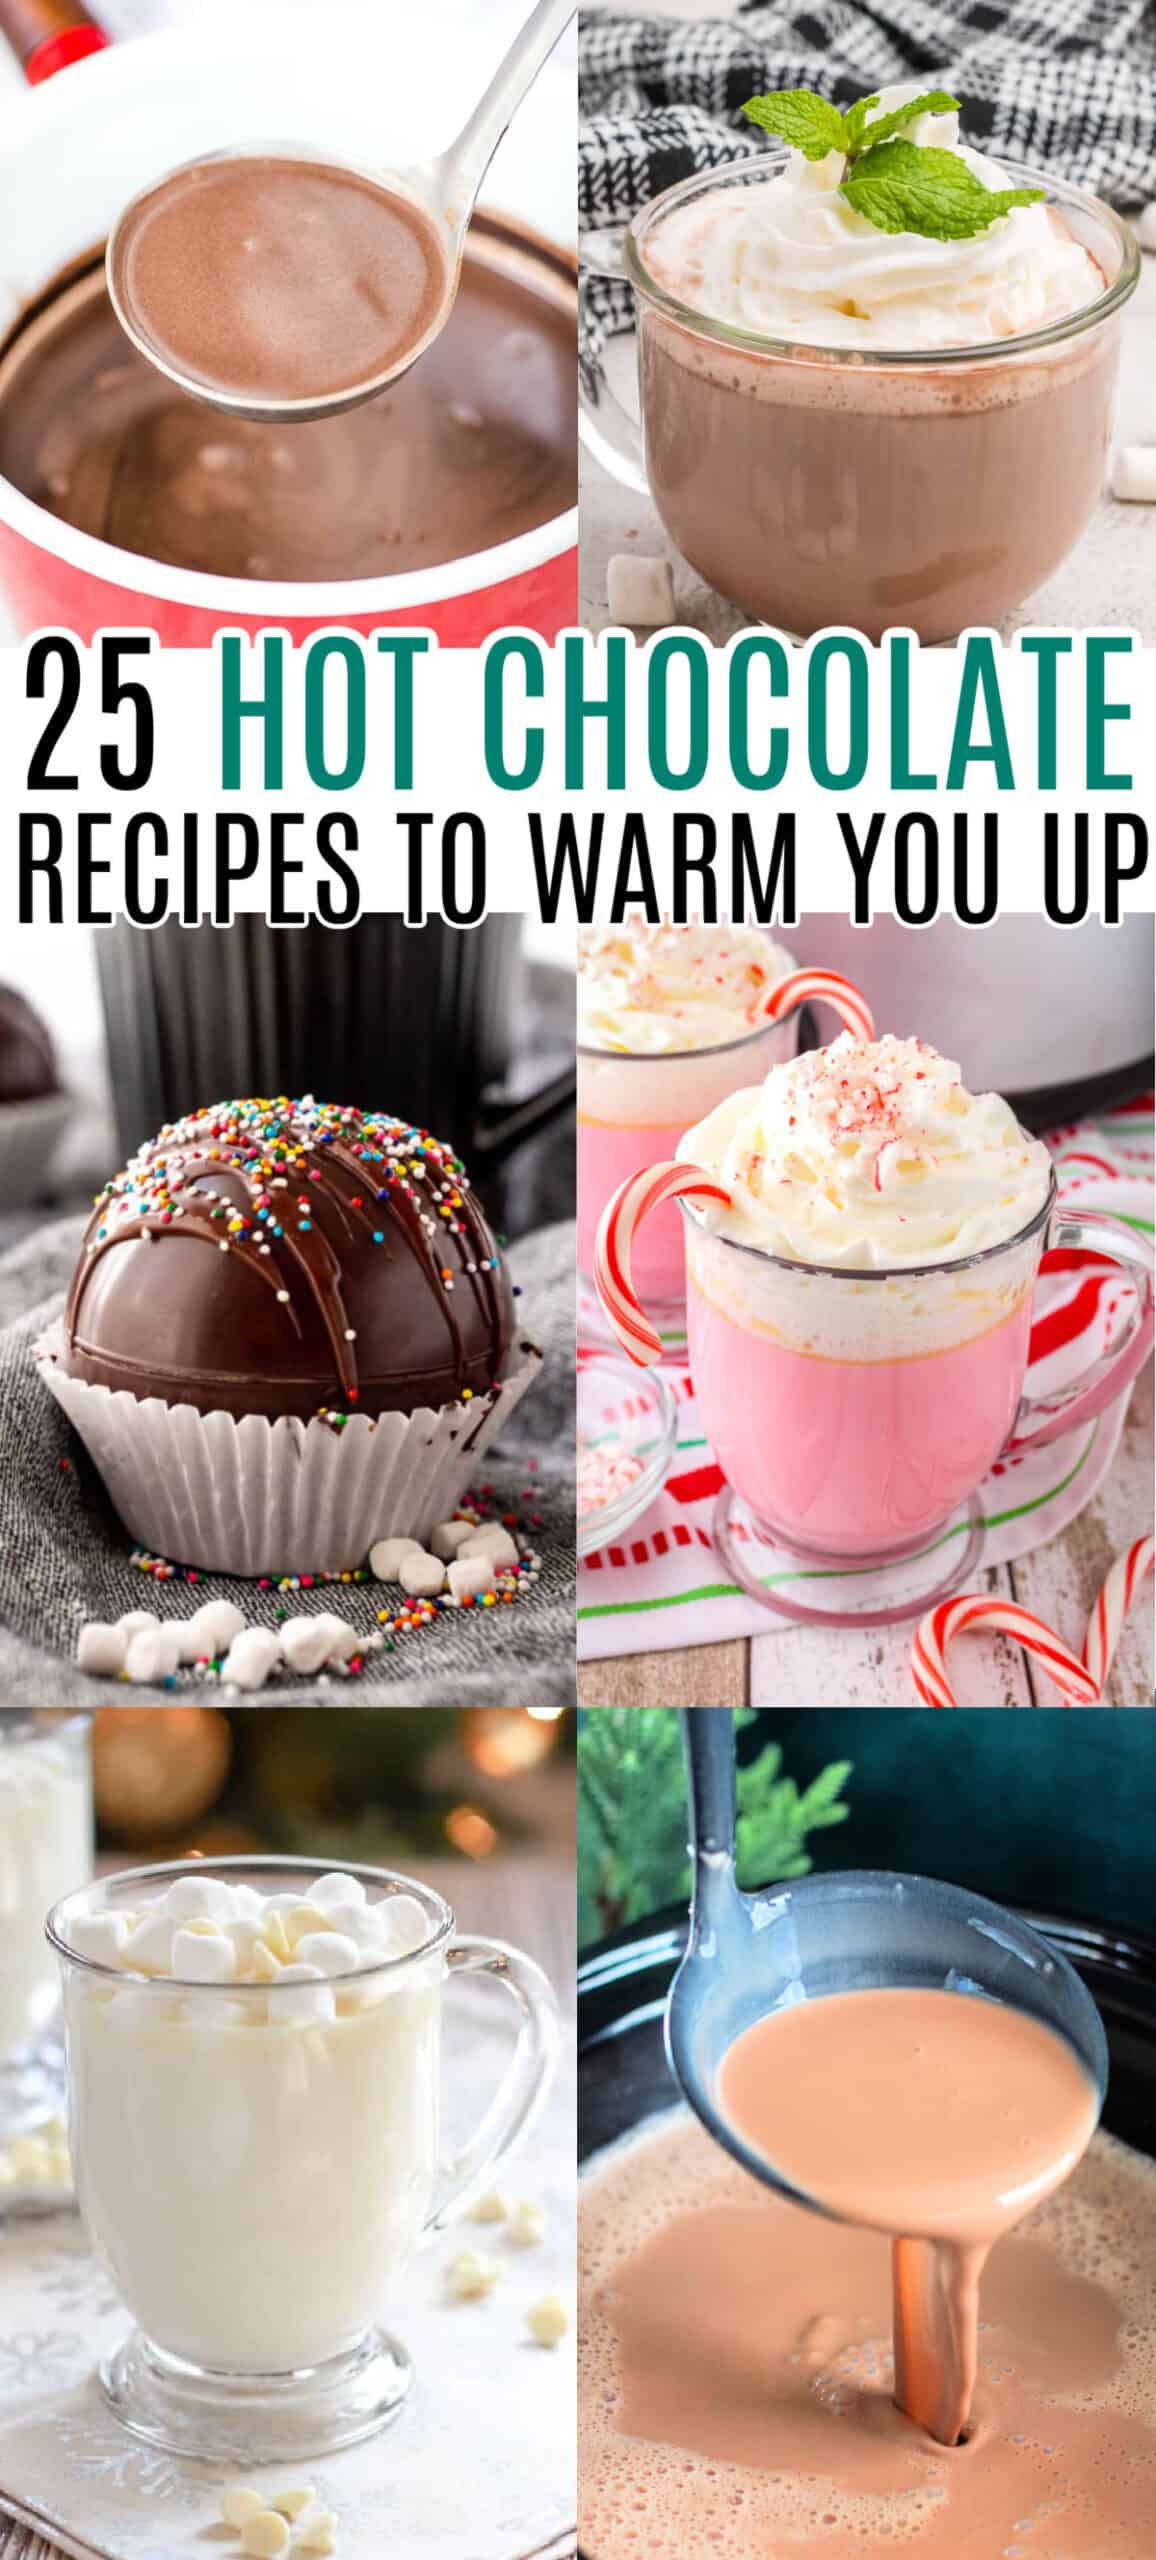 https://realhousemoms.com/wp-content/uploads/25-Hot-Chocolate-Recipes-to-Warm-You-Up-COLLAGE-PIN-scaled.jpg